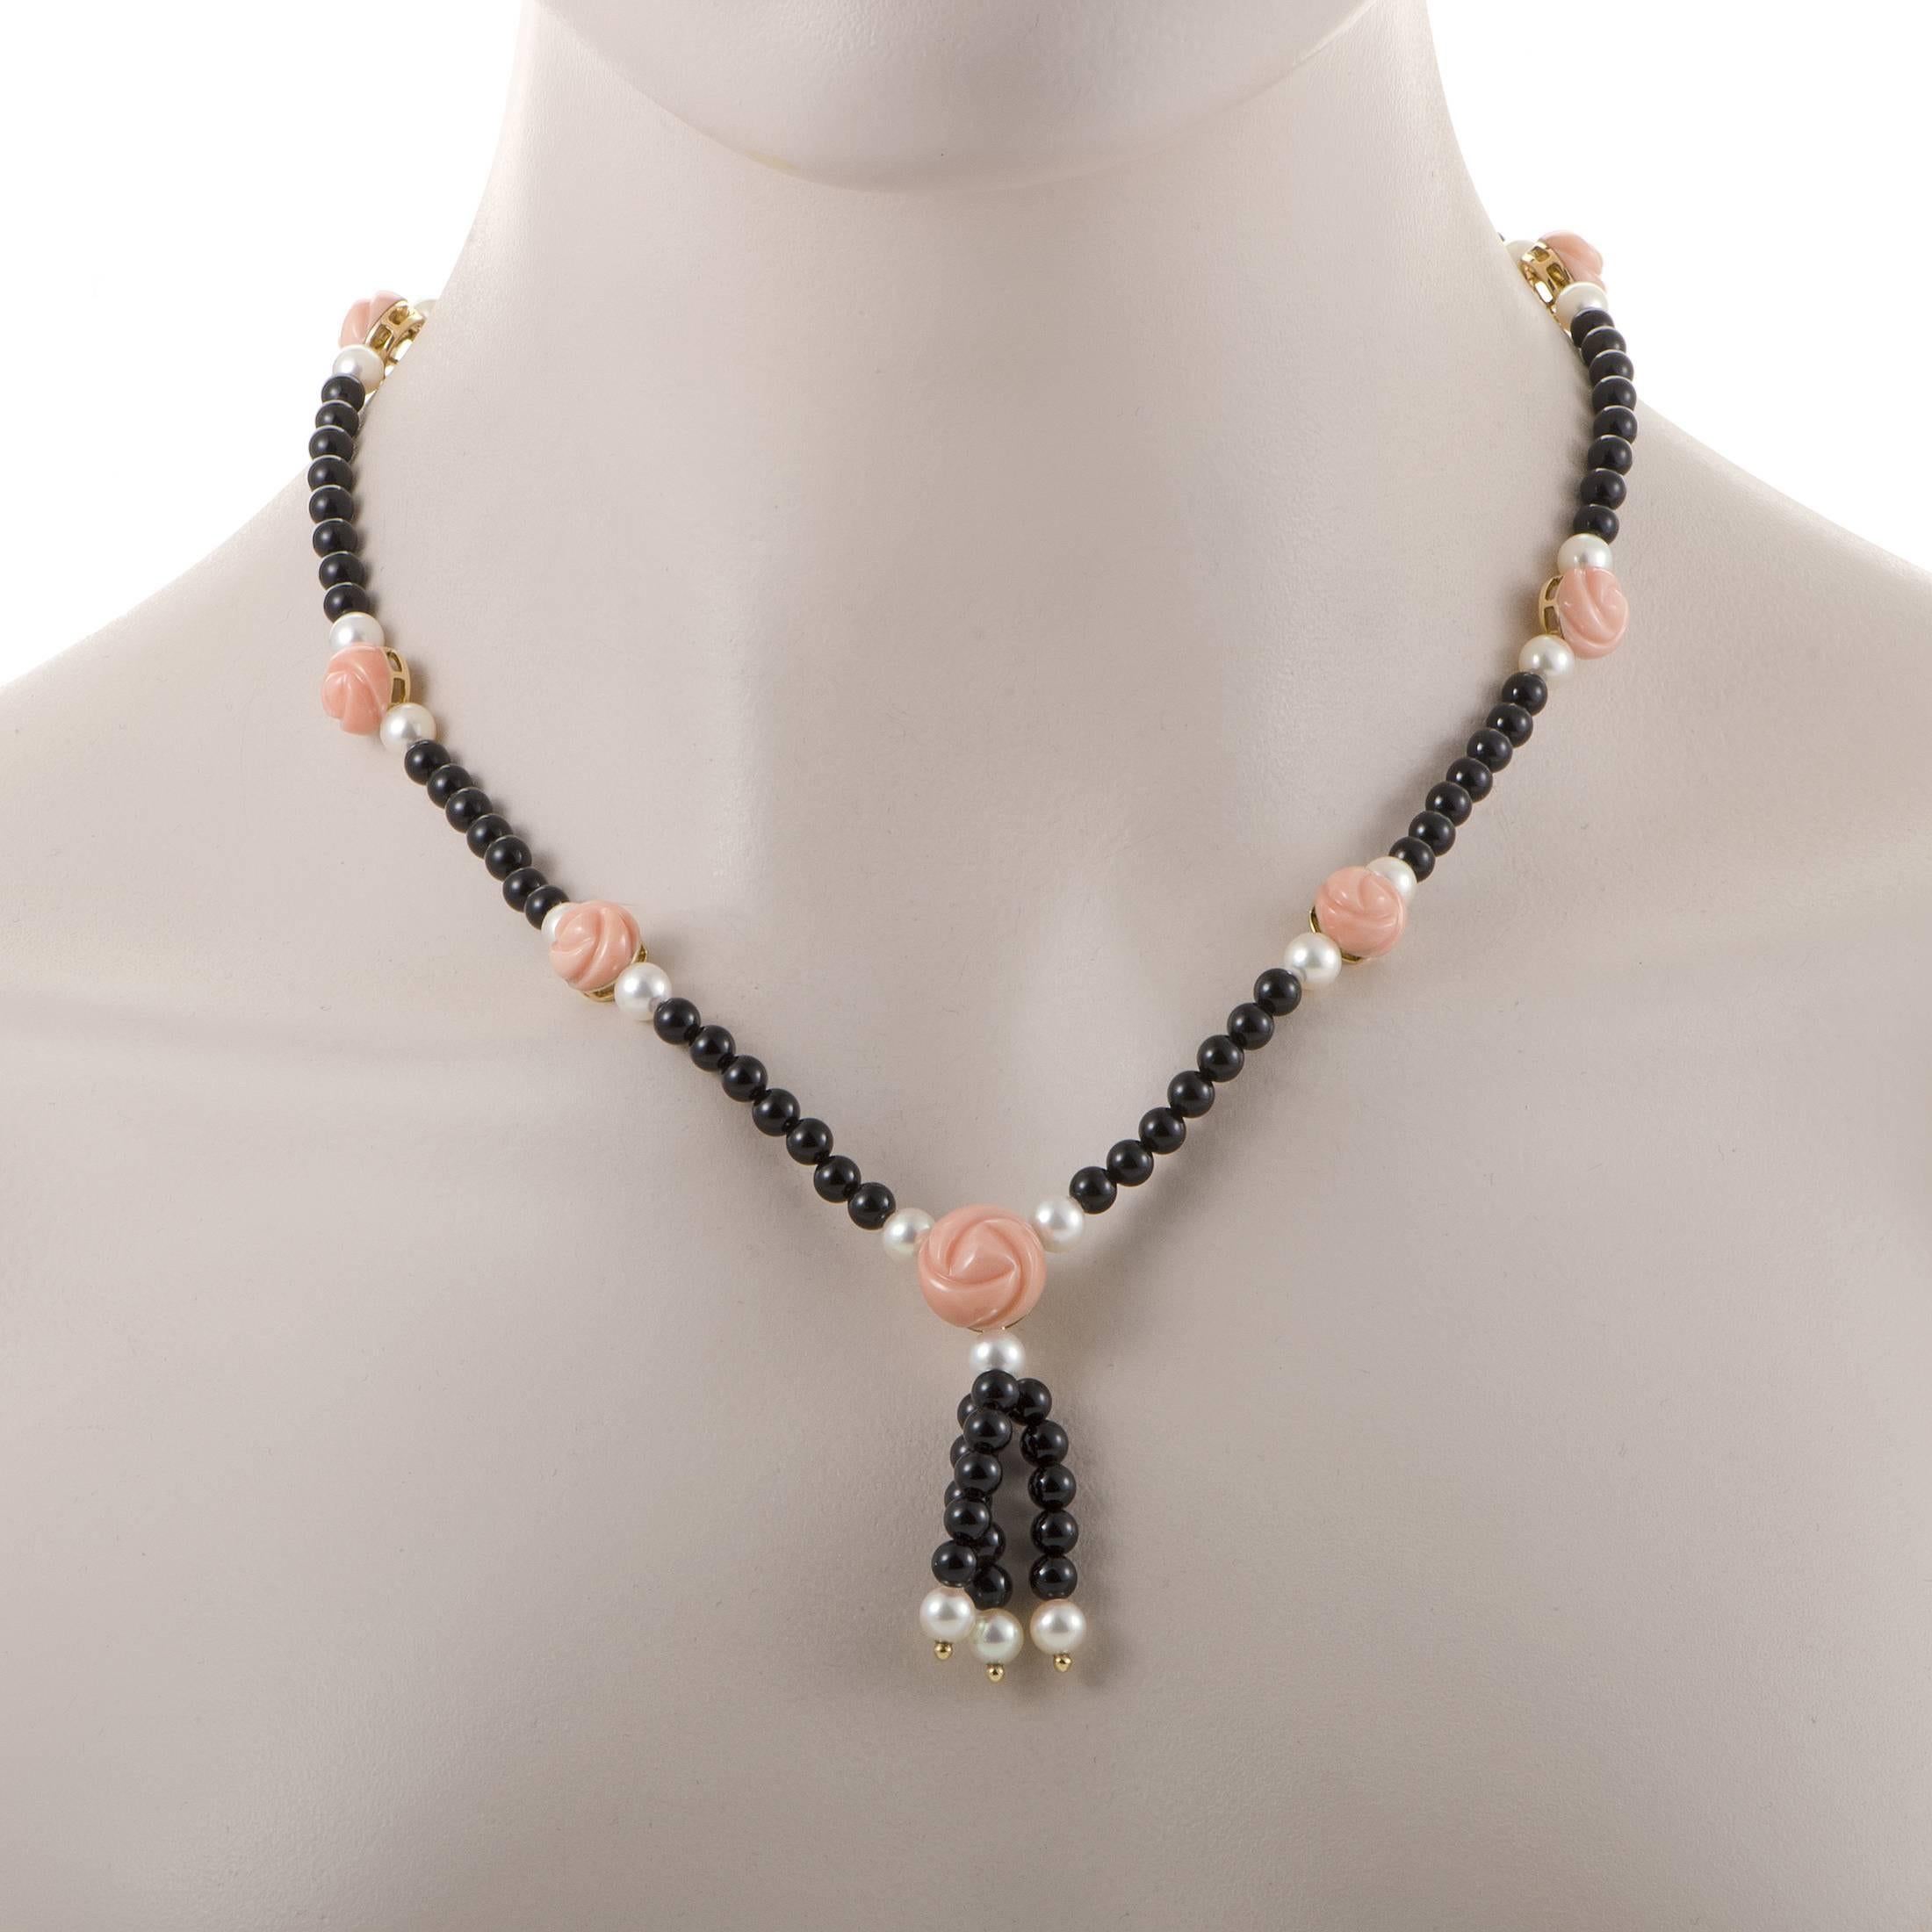 Made of precious 18K yellow gold and completely lined with a fantastic blend of striking onyx beads, delightfully bright pearls and adorable flower-shaped coral stones, this exceptional set of earrings and necklace from Dior offers a slightly